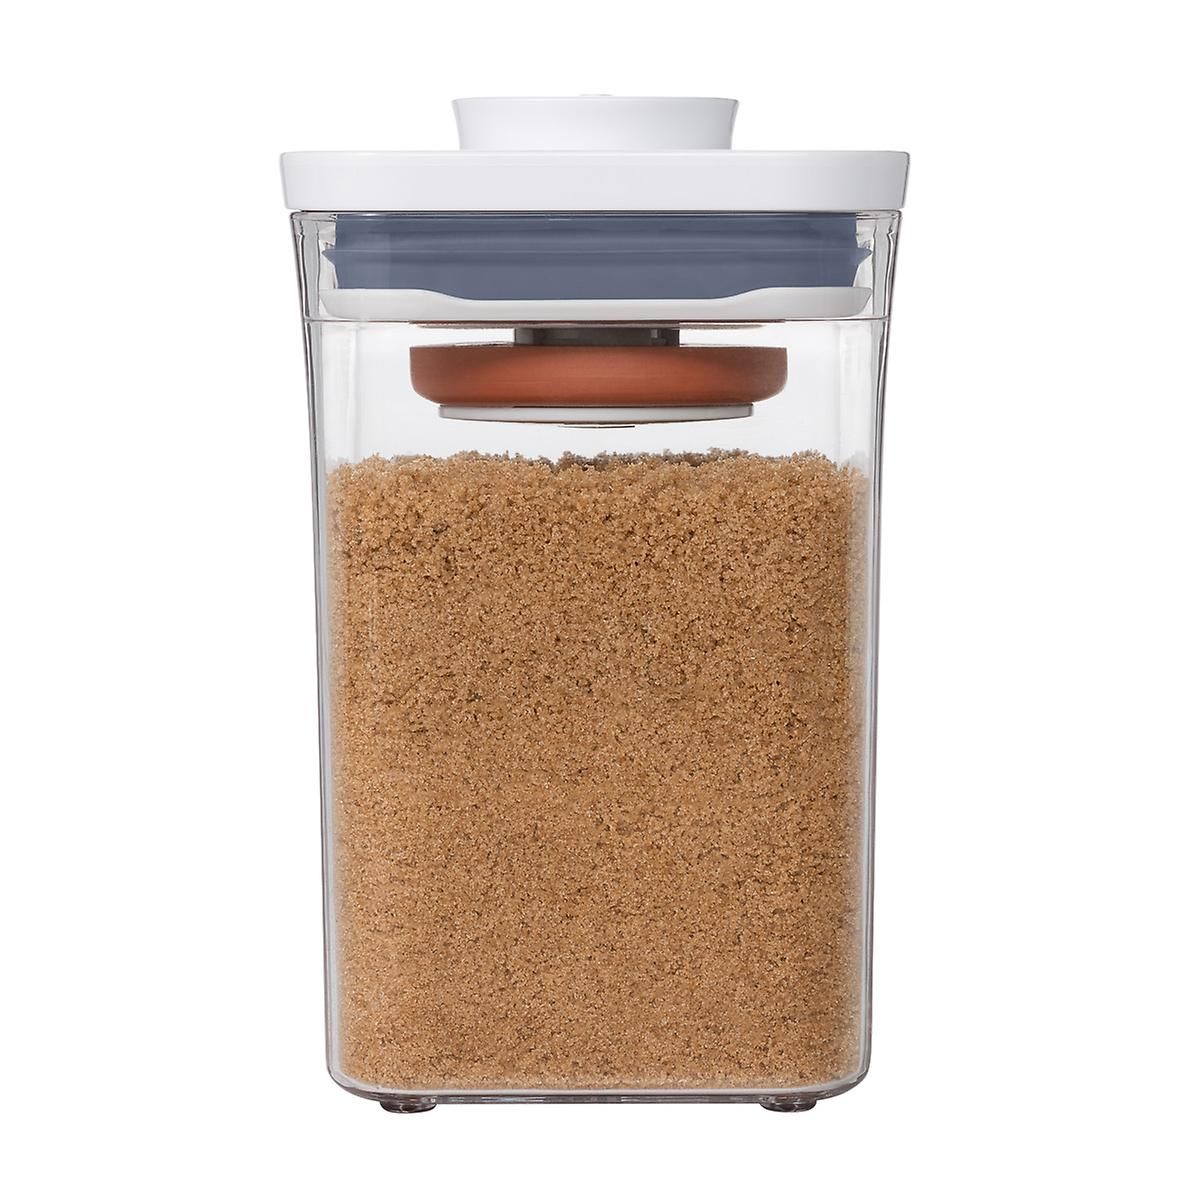 OXO Good Grips POP Brown Sugar Keeper | The Container Store